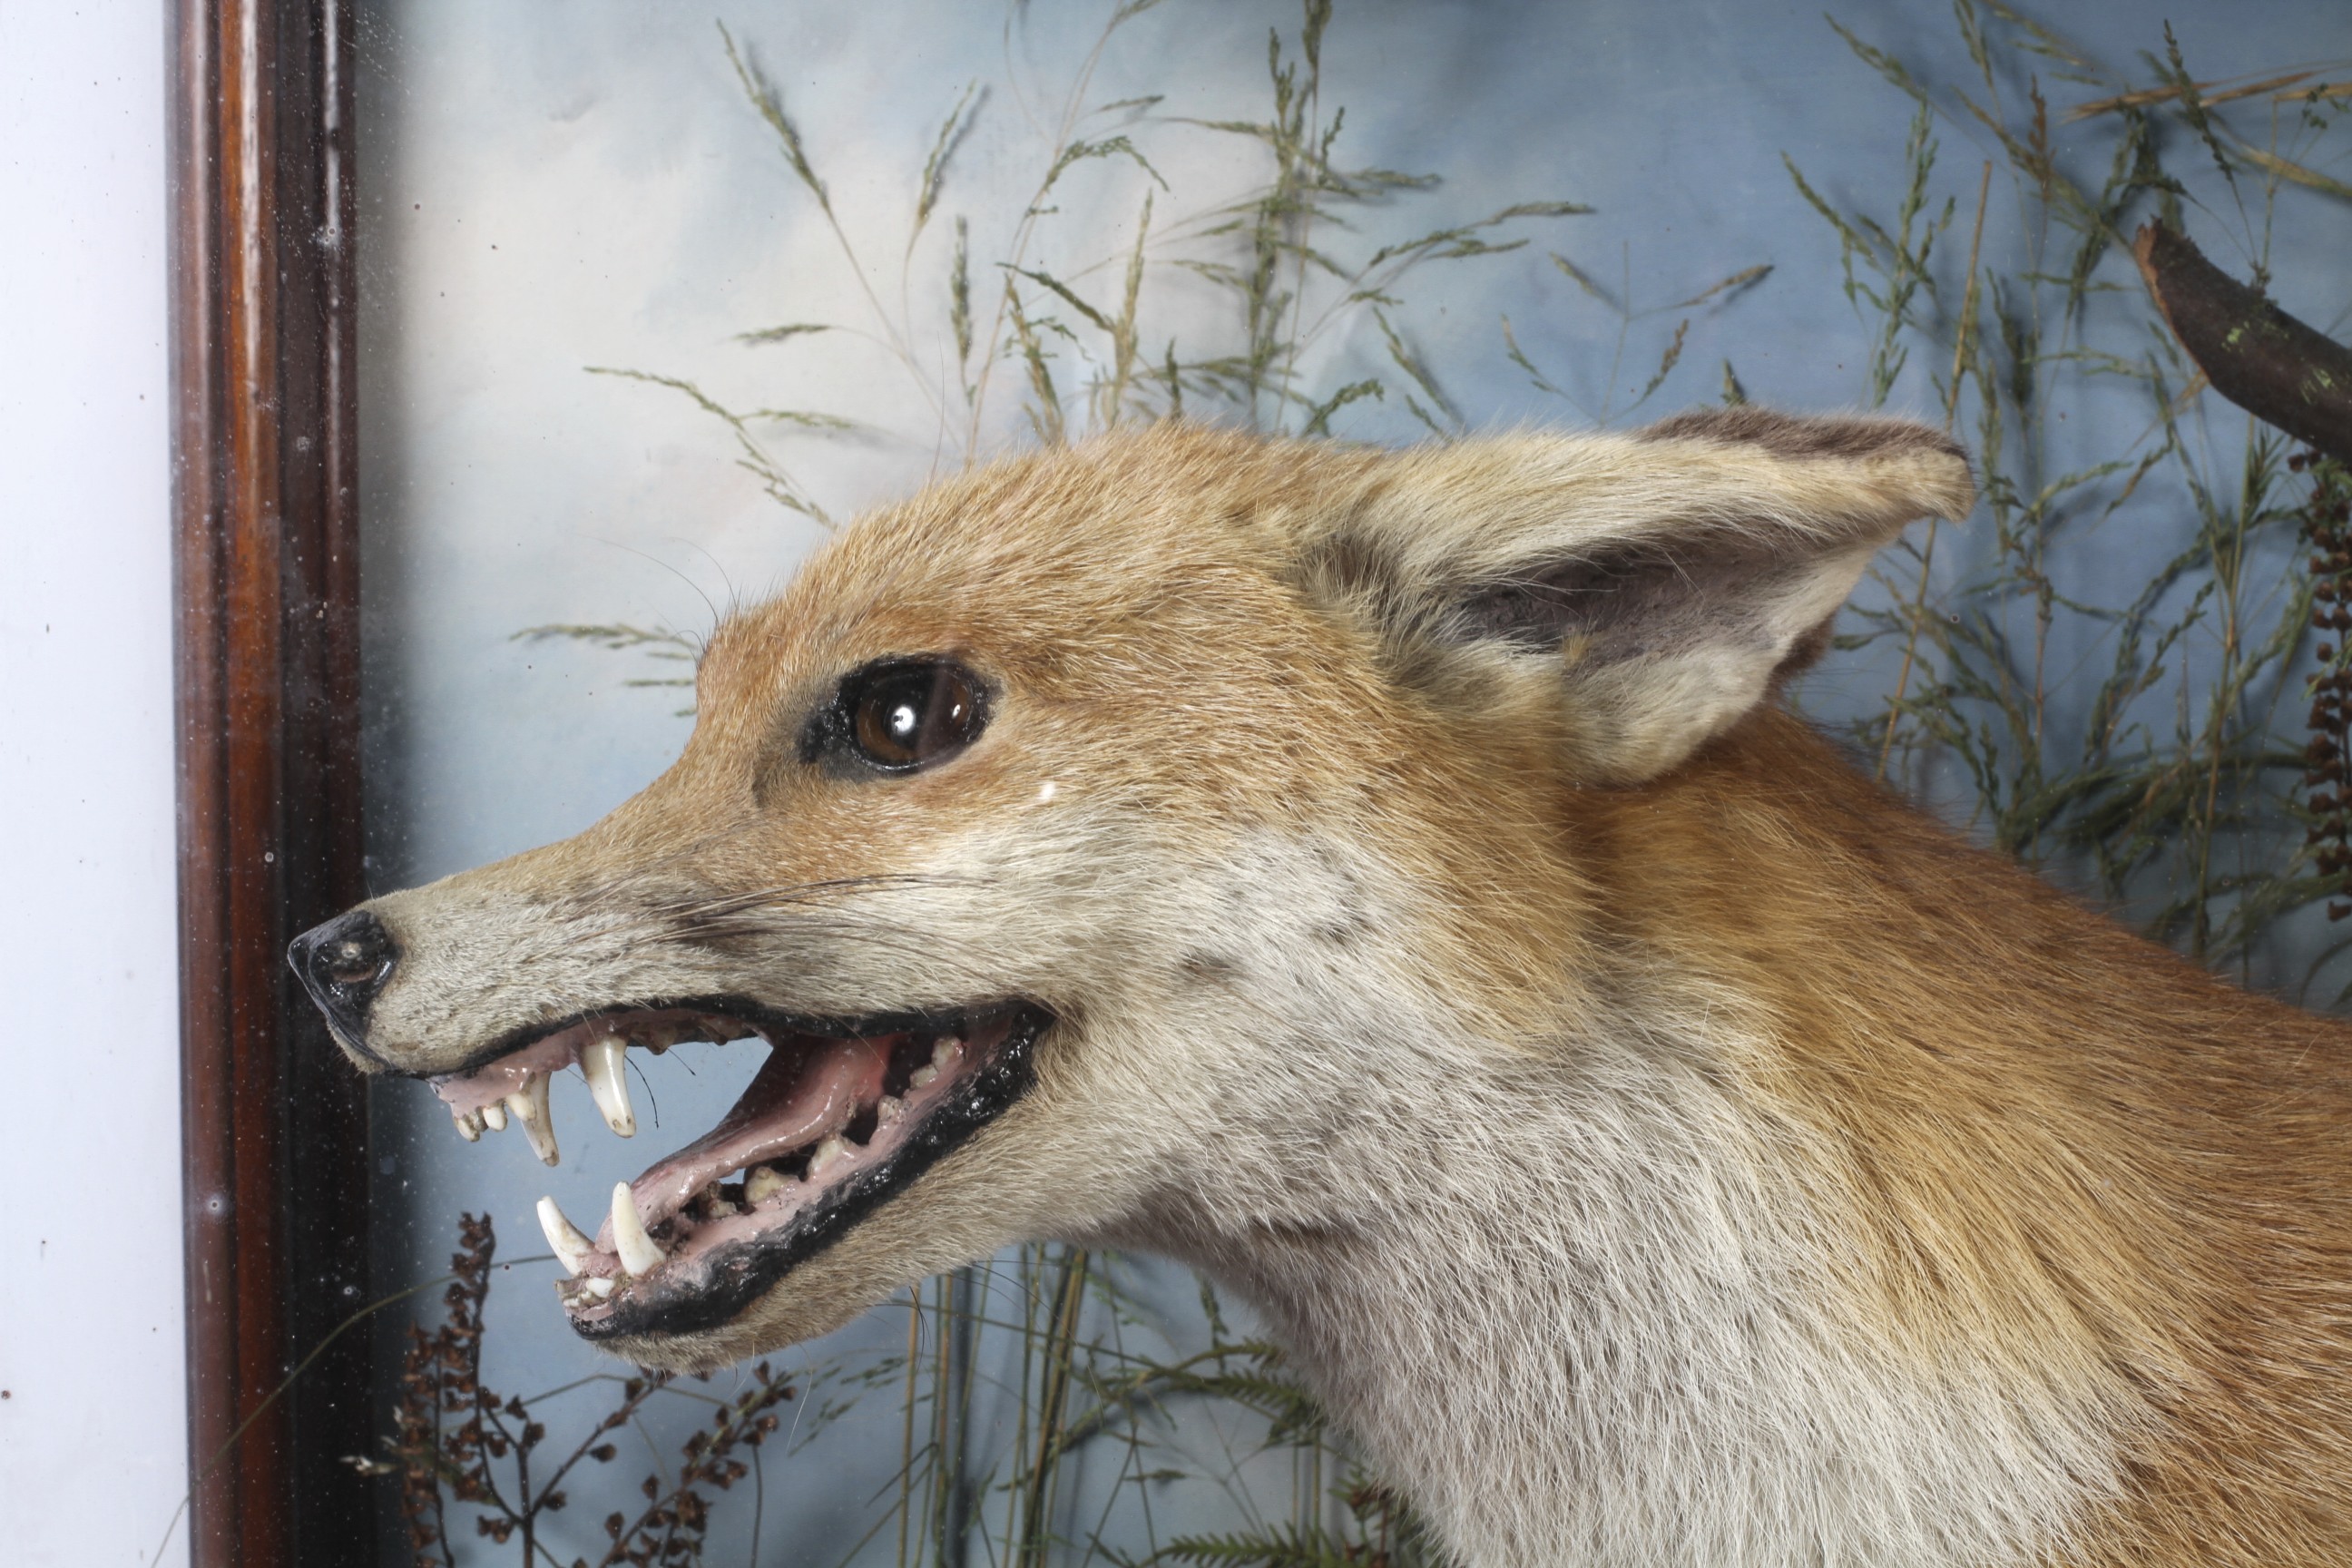 A taxidermy fox in a glass case. - Image 2 of 2